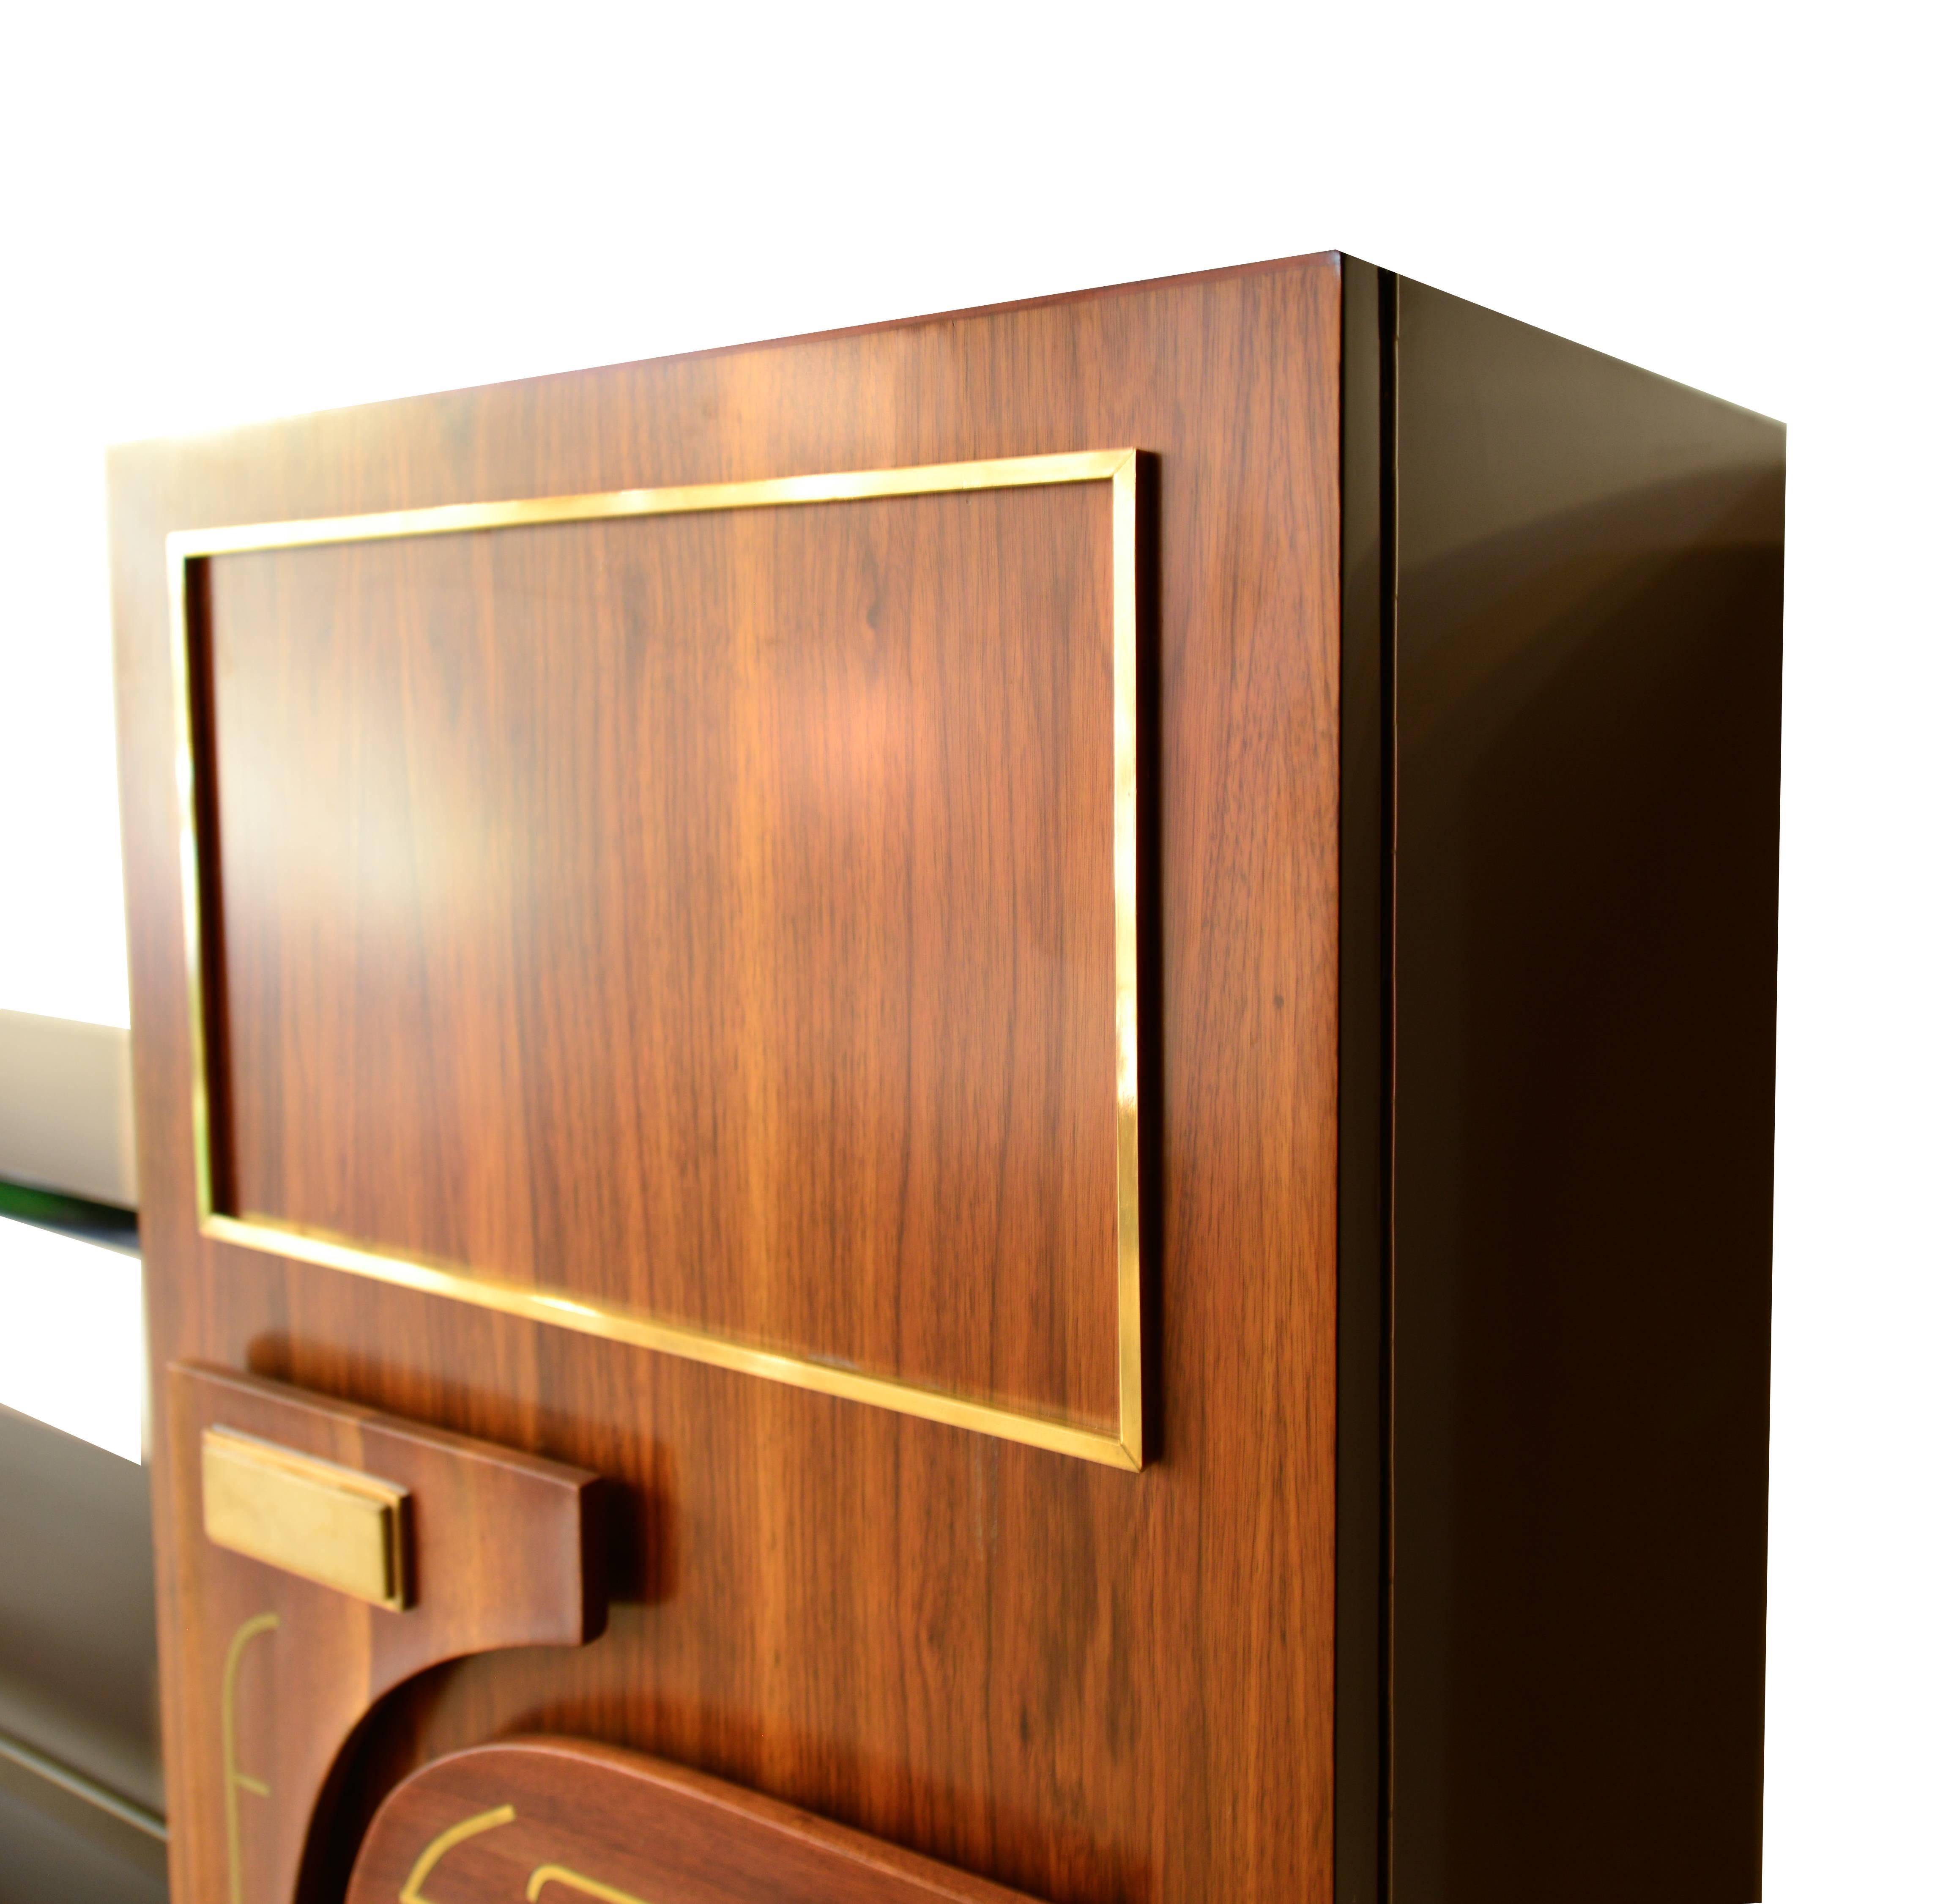 Frank Kyle Wall Unit Bookcase or Dry Bar

Mahogany wood, bronze and goatskin details.